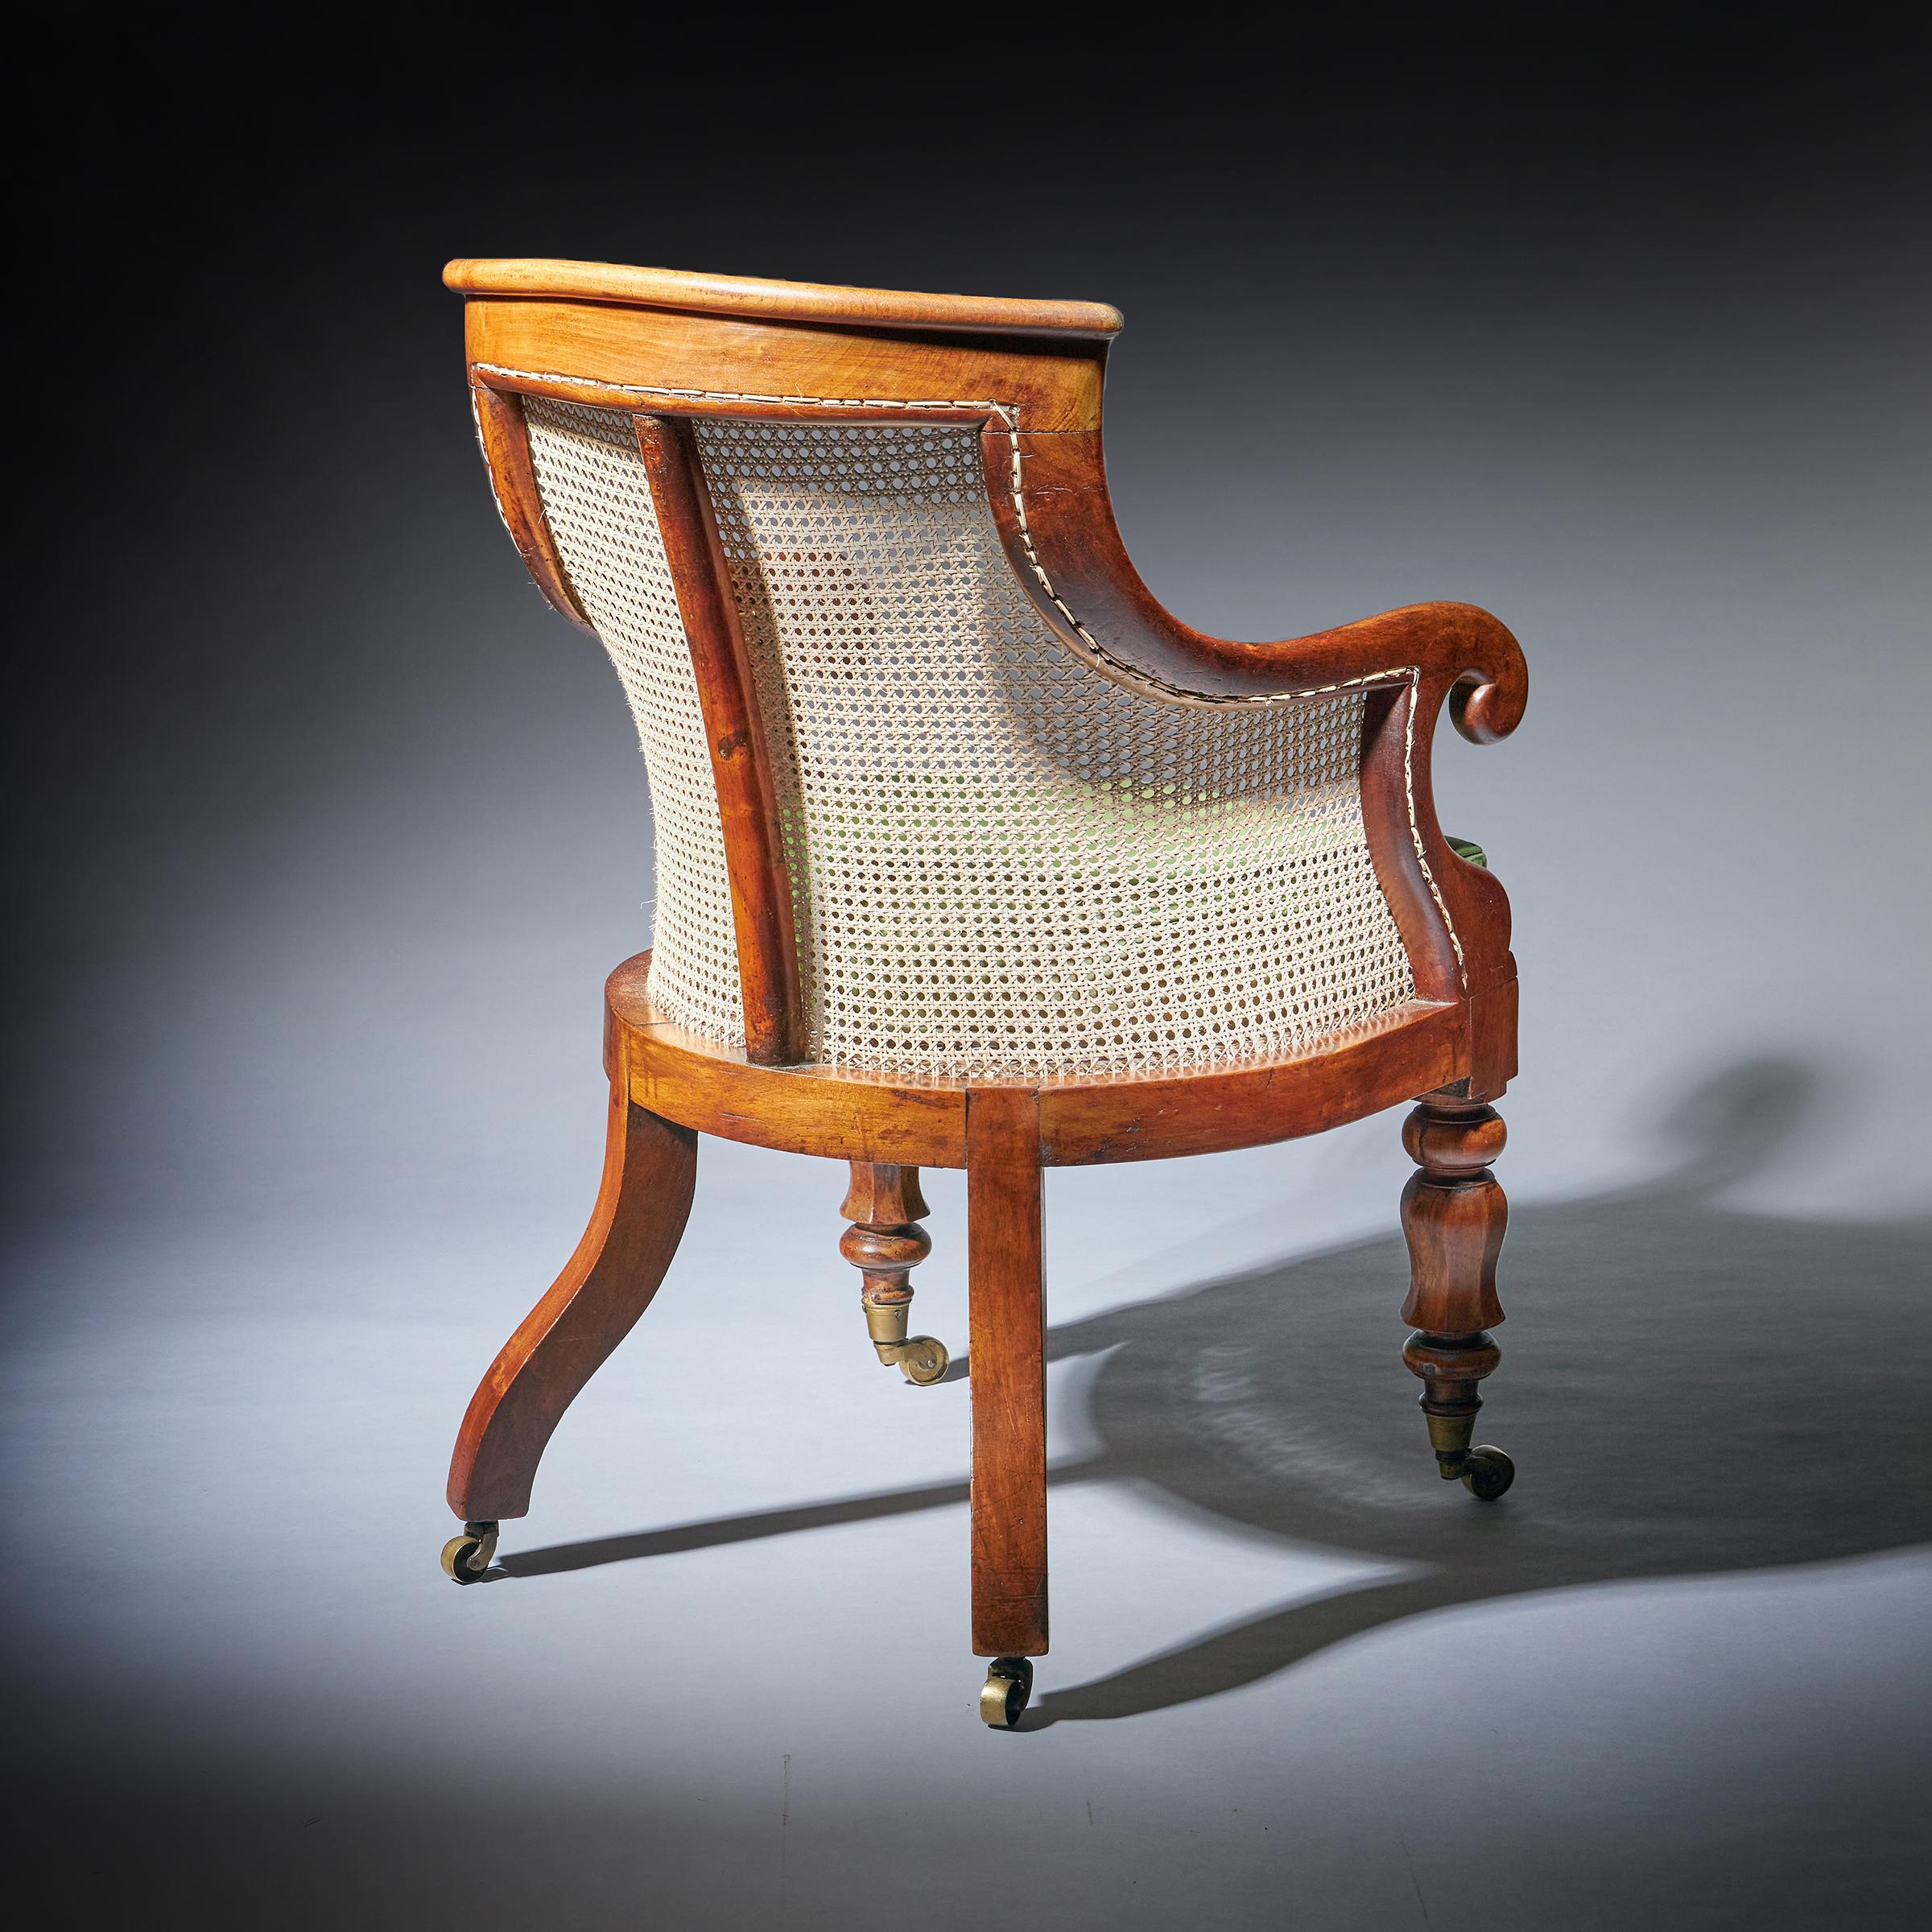 English 19th Century William IV Mahogany Bergère Armchair with Leather Cushion For Sale